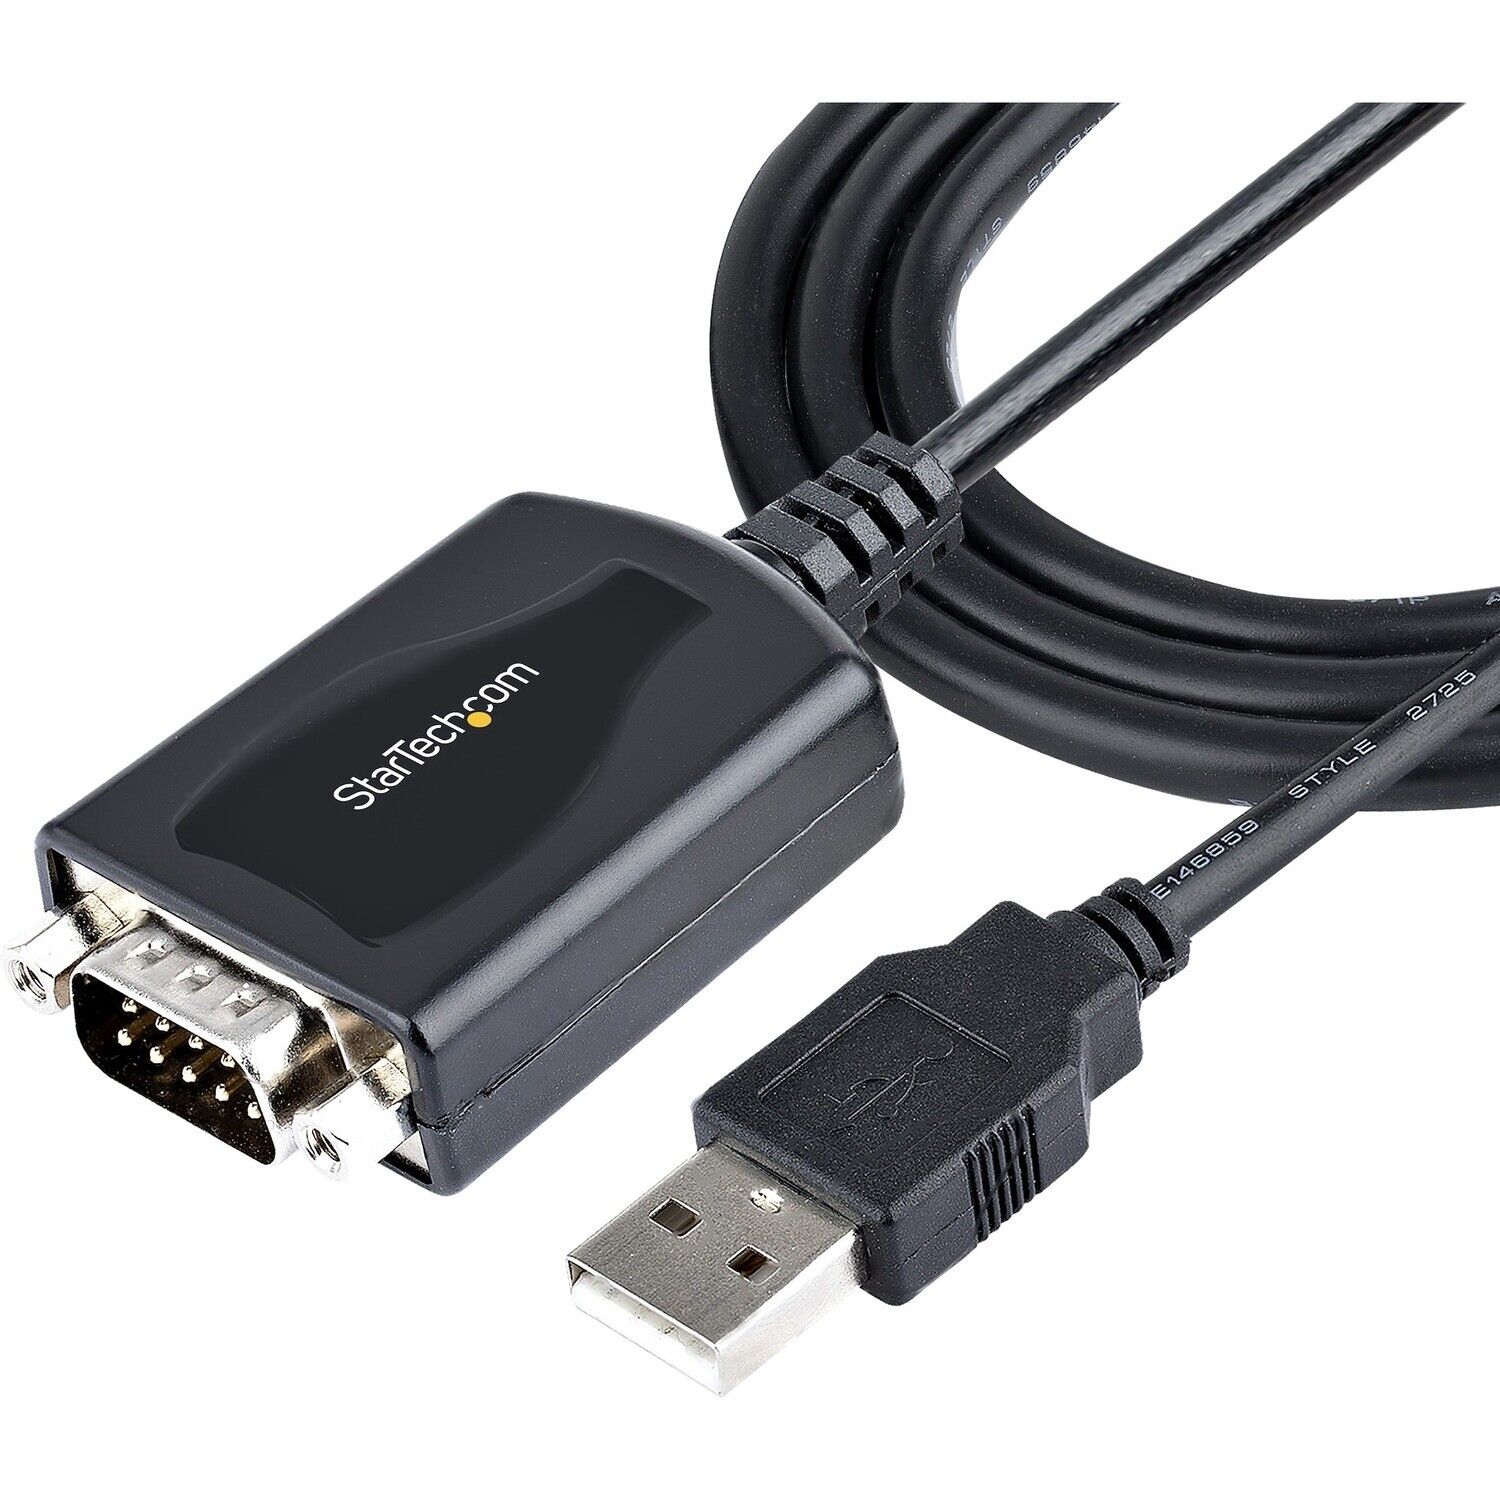 StarTech.com 3ft [1m] USB to Serial Cable with COM Port Retention, DB9 Male